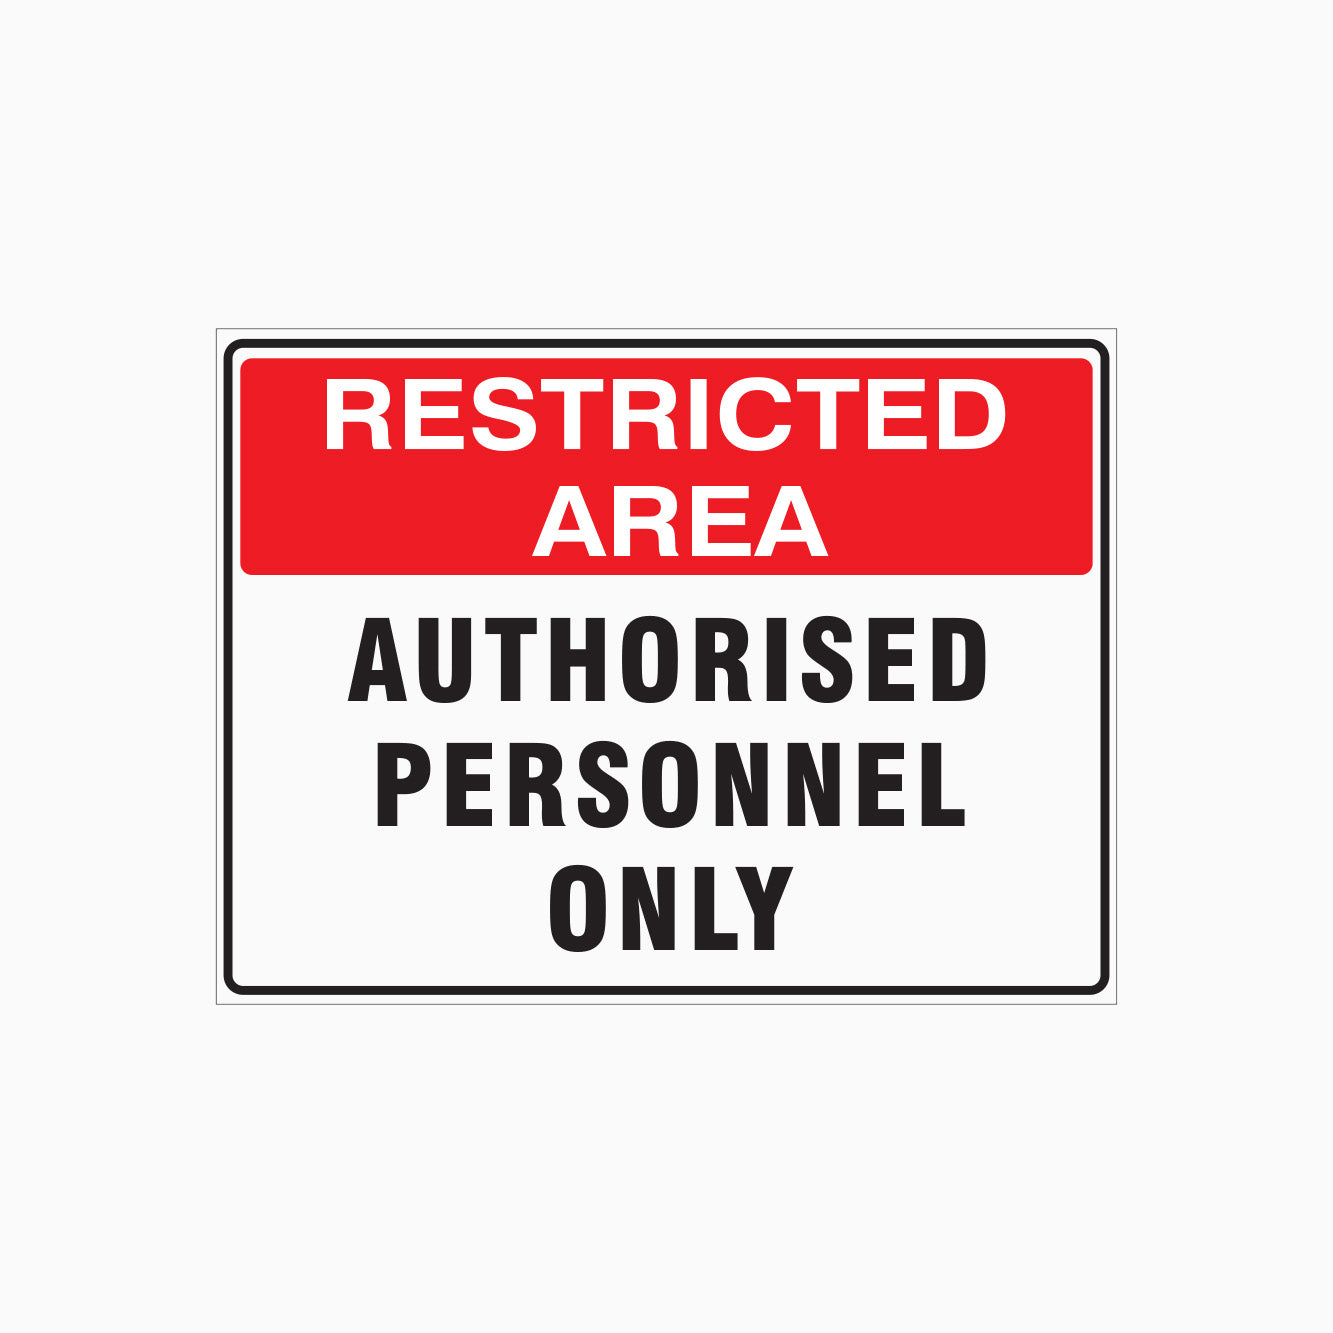 RESTRICTED AREA SIGN - AUTHORISED PERSONNEL ONLY SIGN